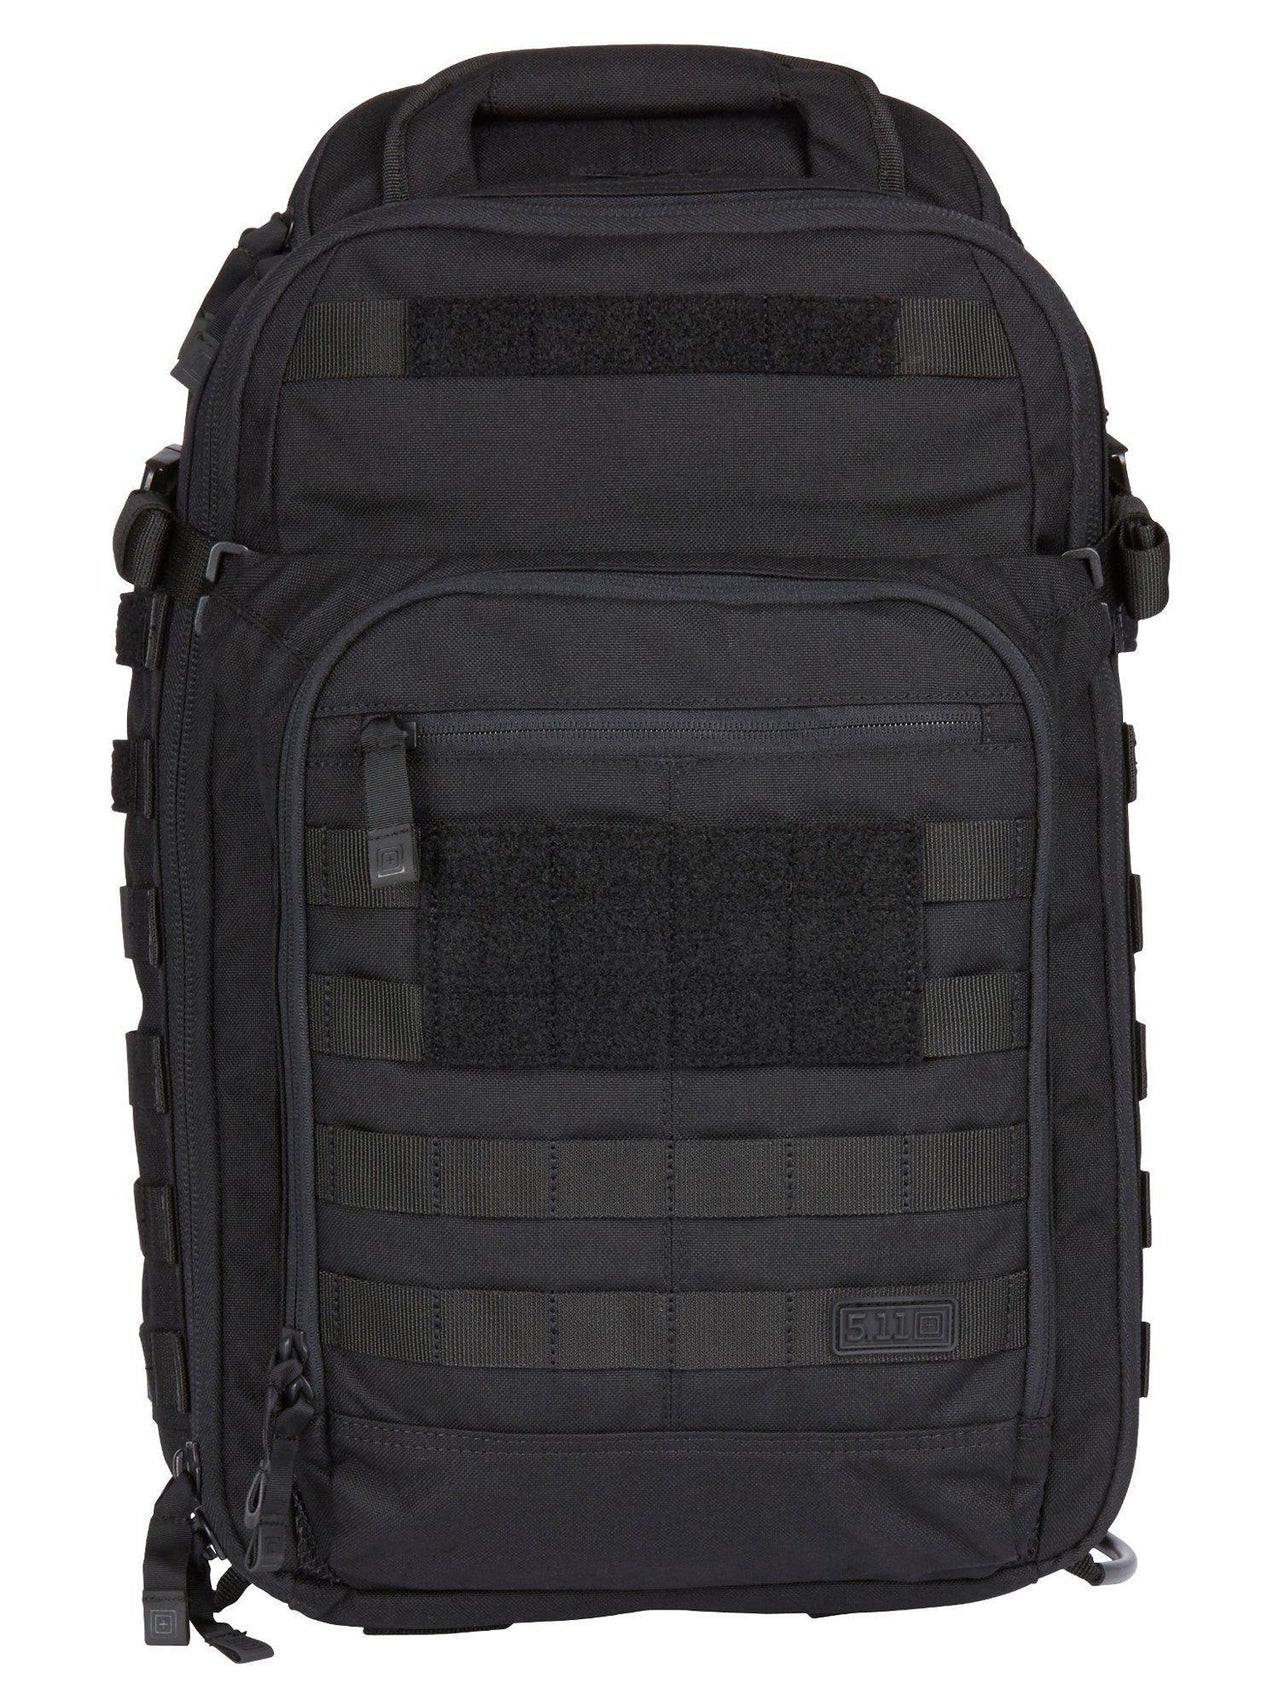 5.11 Tactical All Hazards Nitro Backpack - TacSource